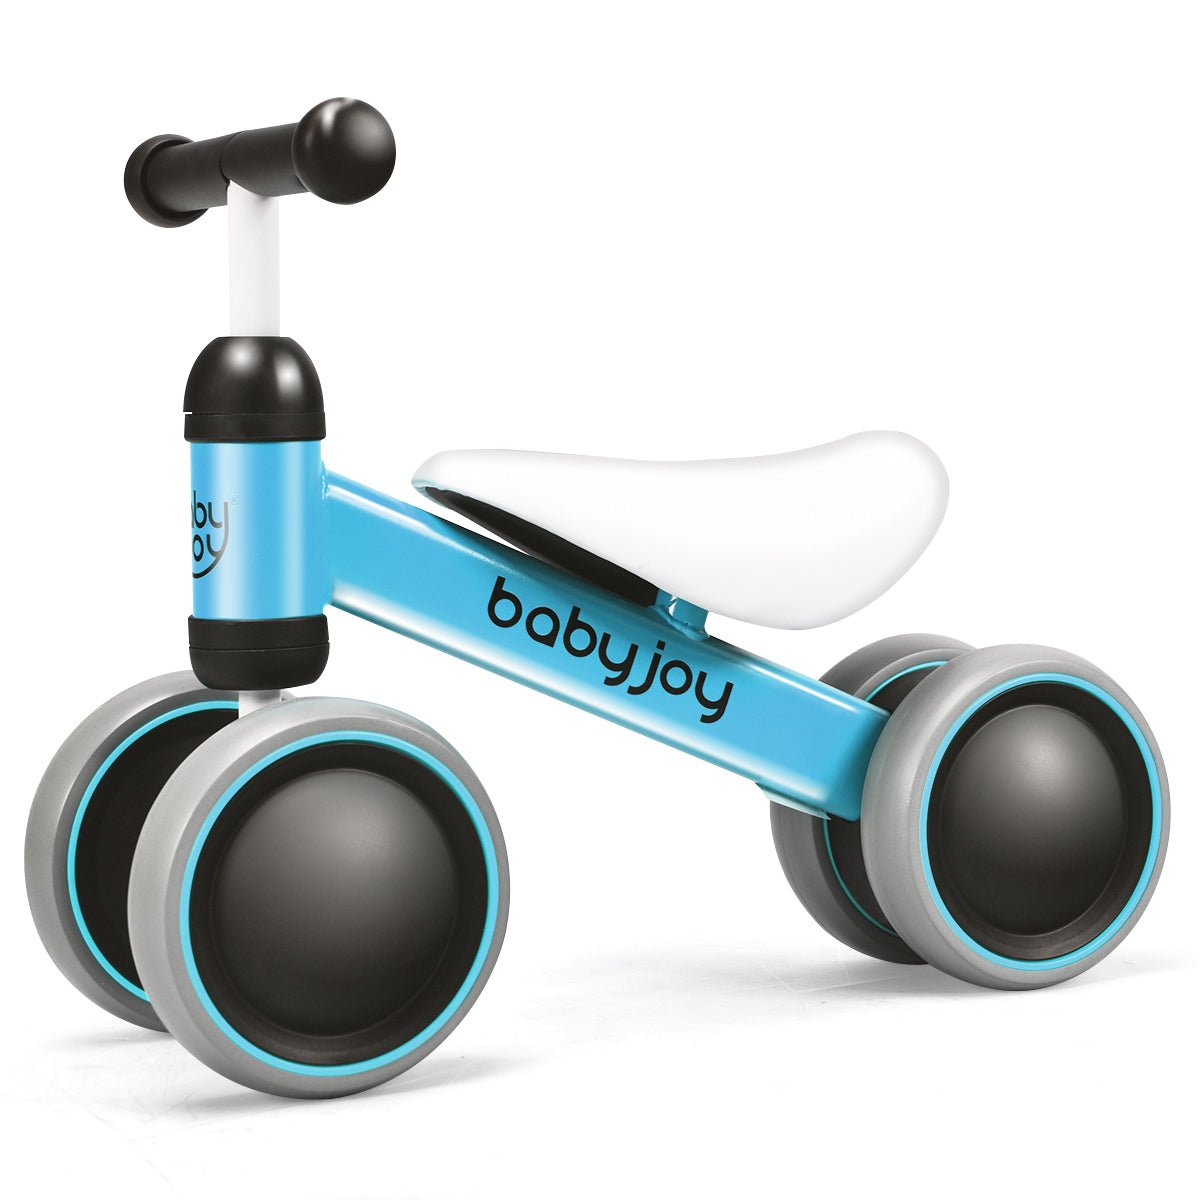 Riding Exploration: Blue Balance Training Bike with 4 Wheels for Little Ones